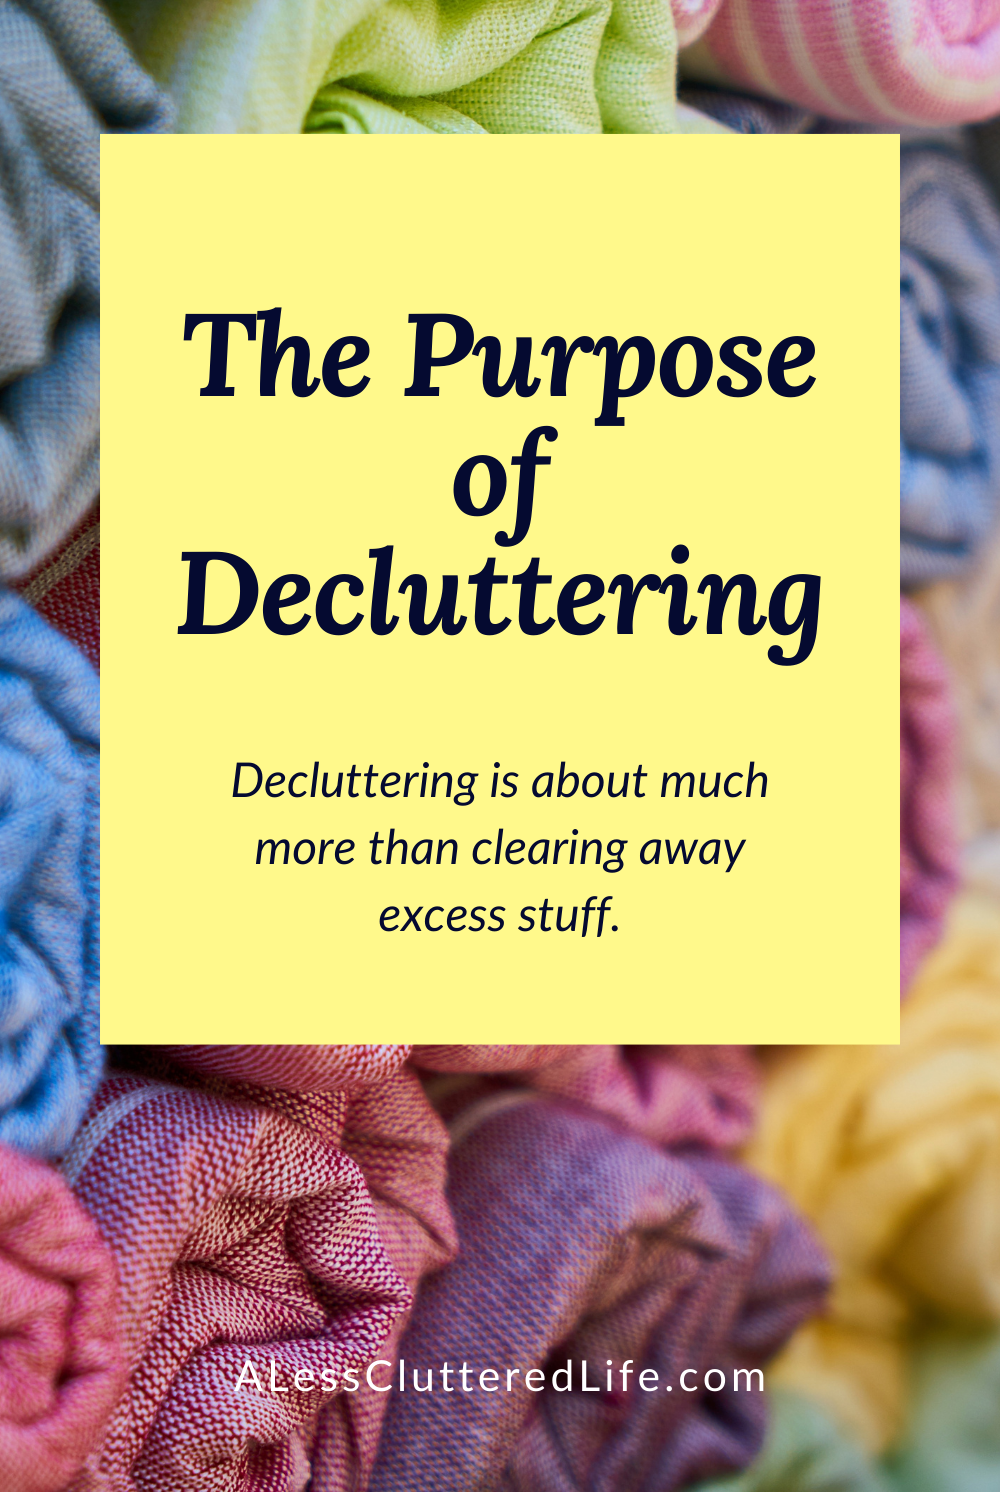 Graphic with excess items in the background questioning the purpose of decluttering